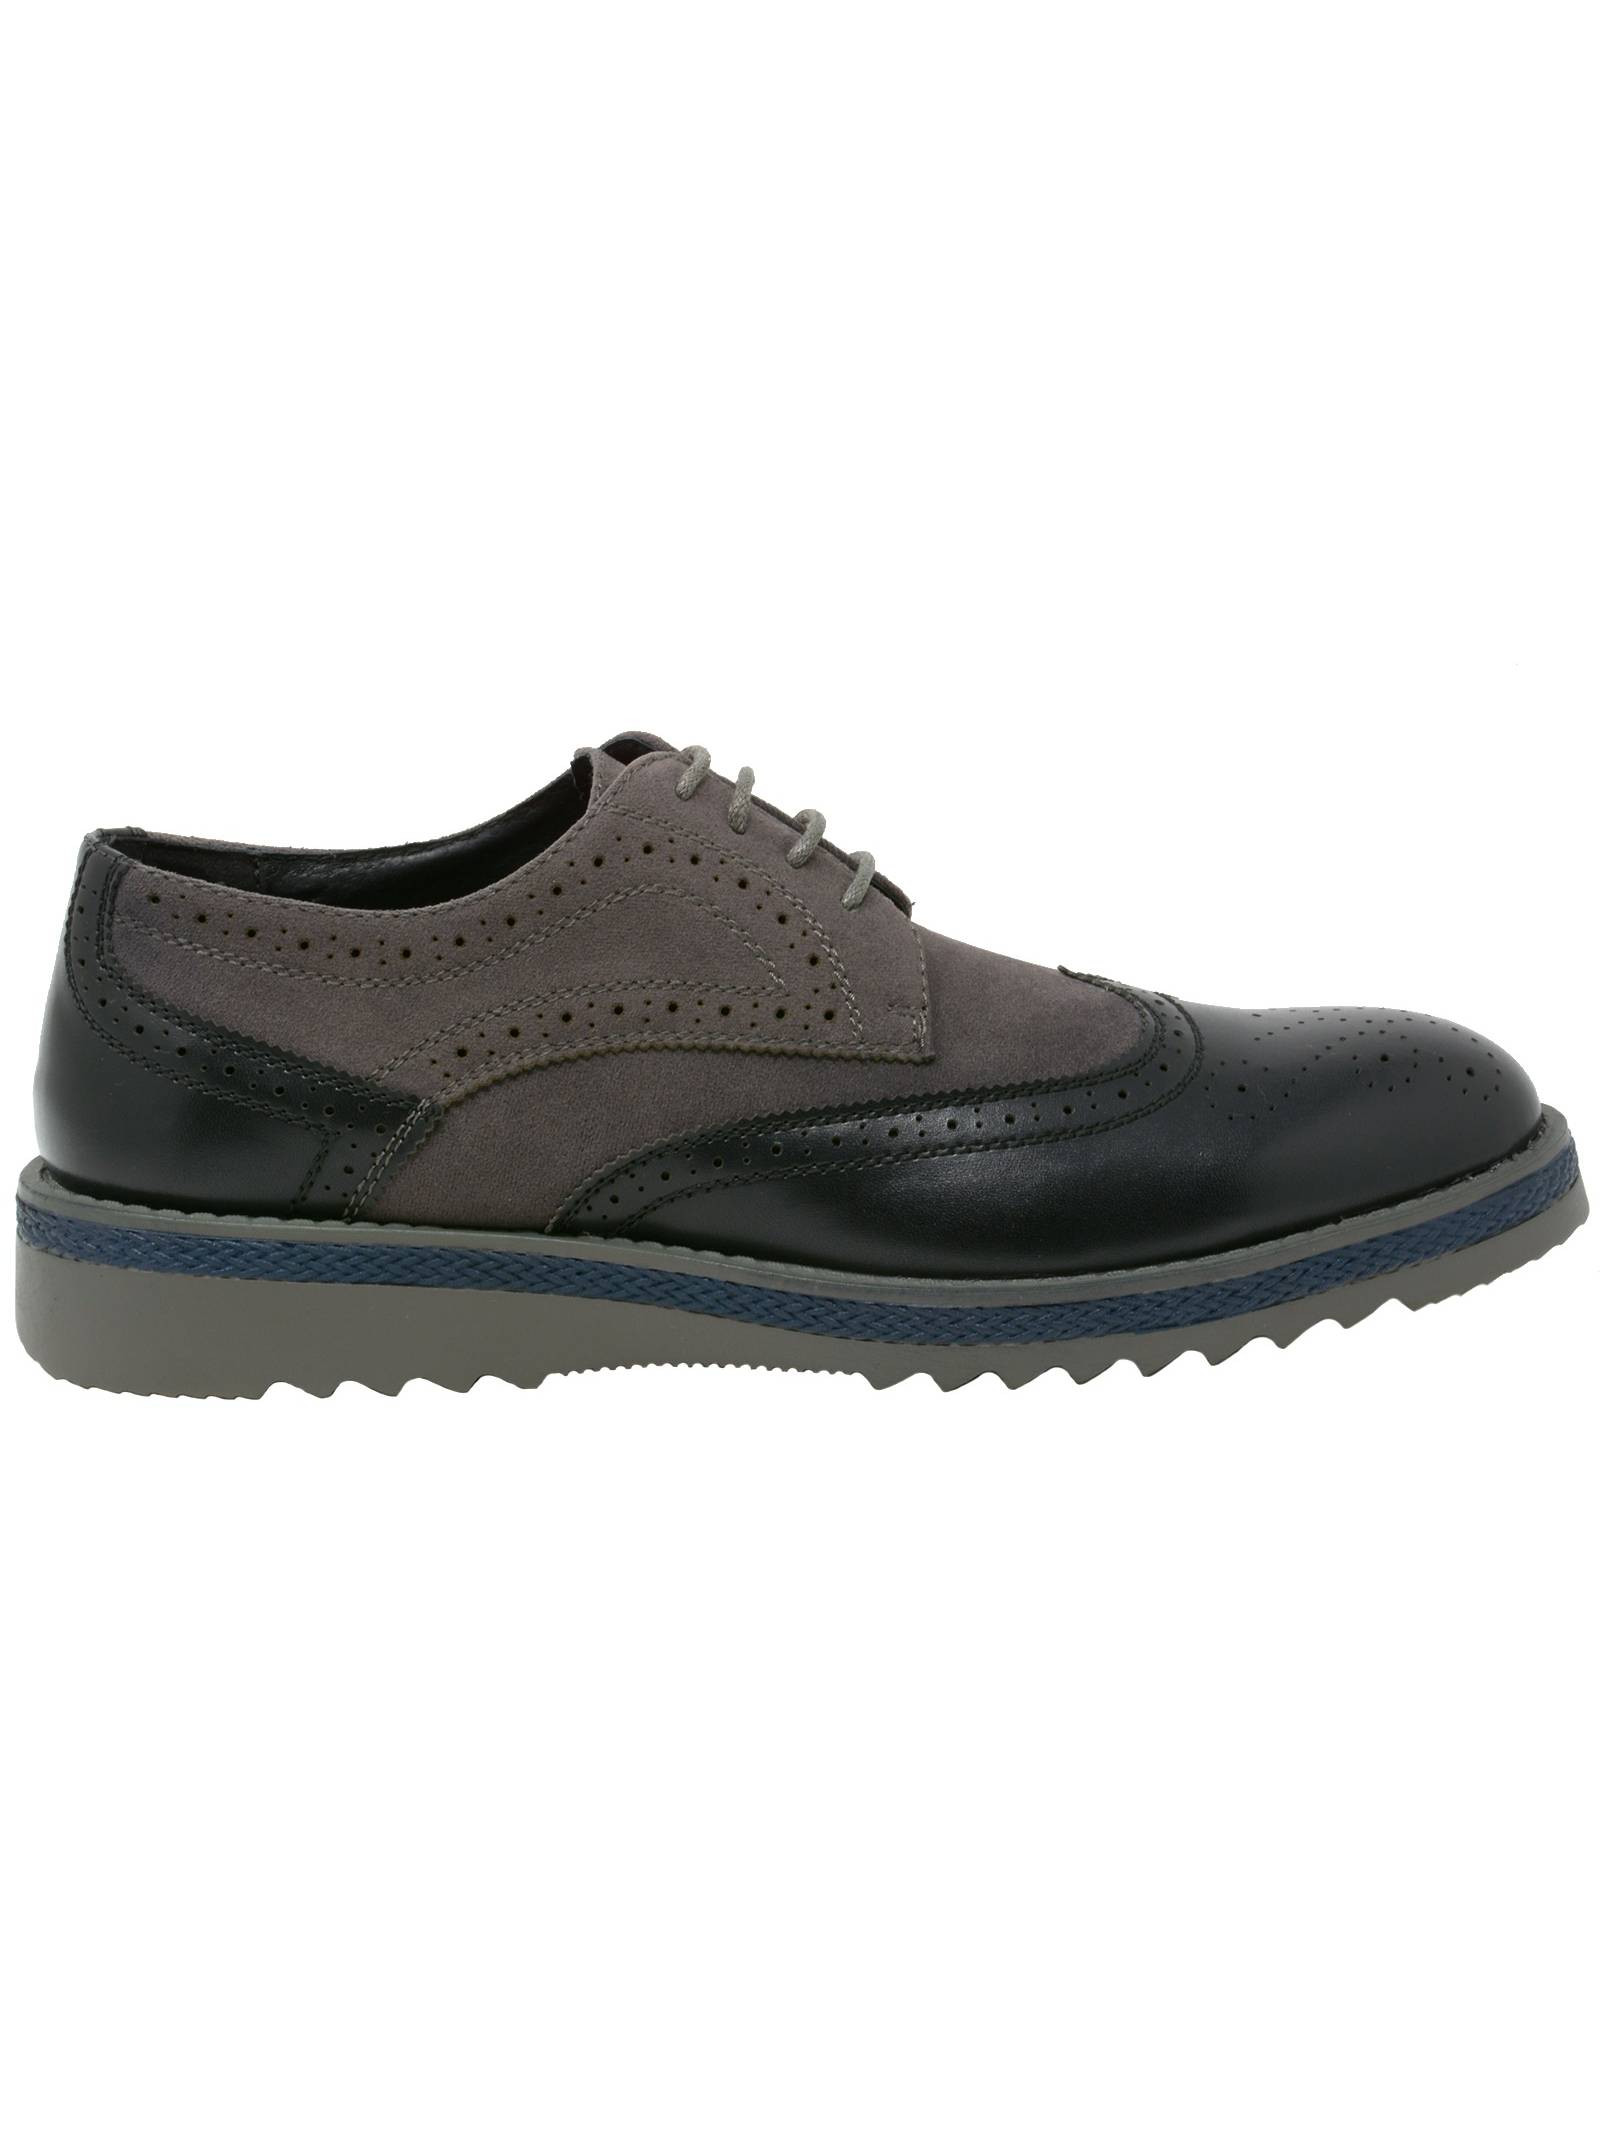 Alpine Swiss Alec Mens Wingtip Shoes 1.5” Ripple Sole Leather Insole & Lining - image 2 of 7